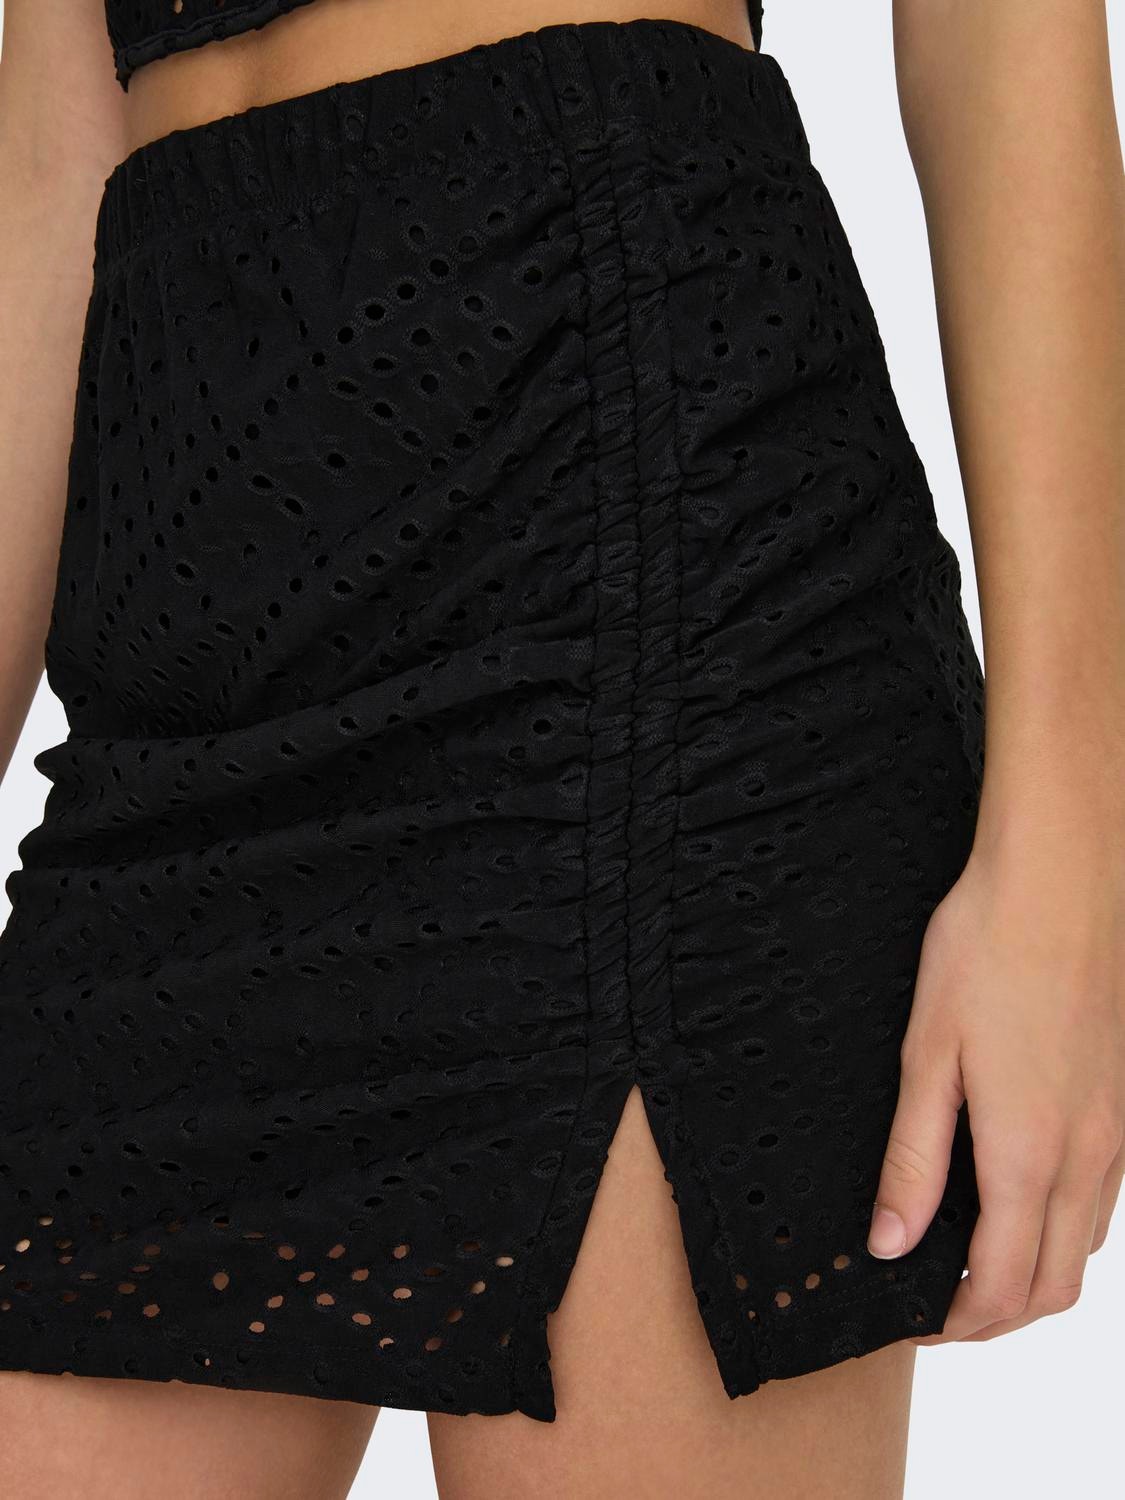 ONLY Mini skirt with ruching detail -Black - 15294437